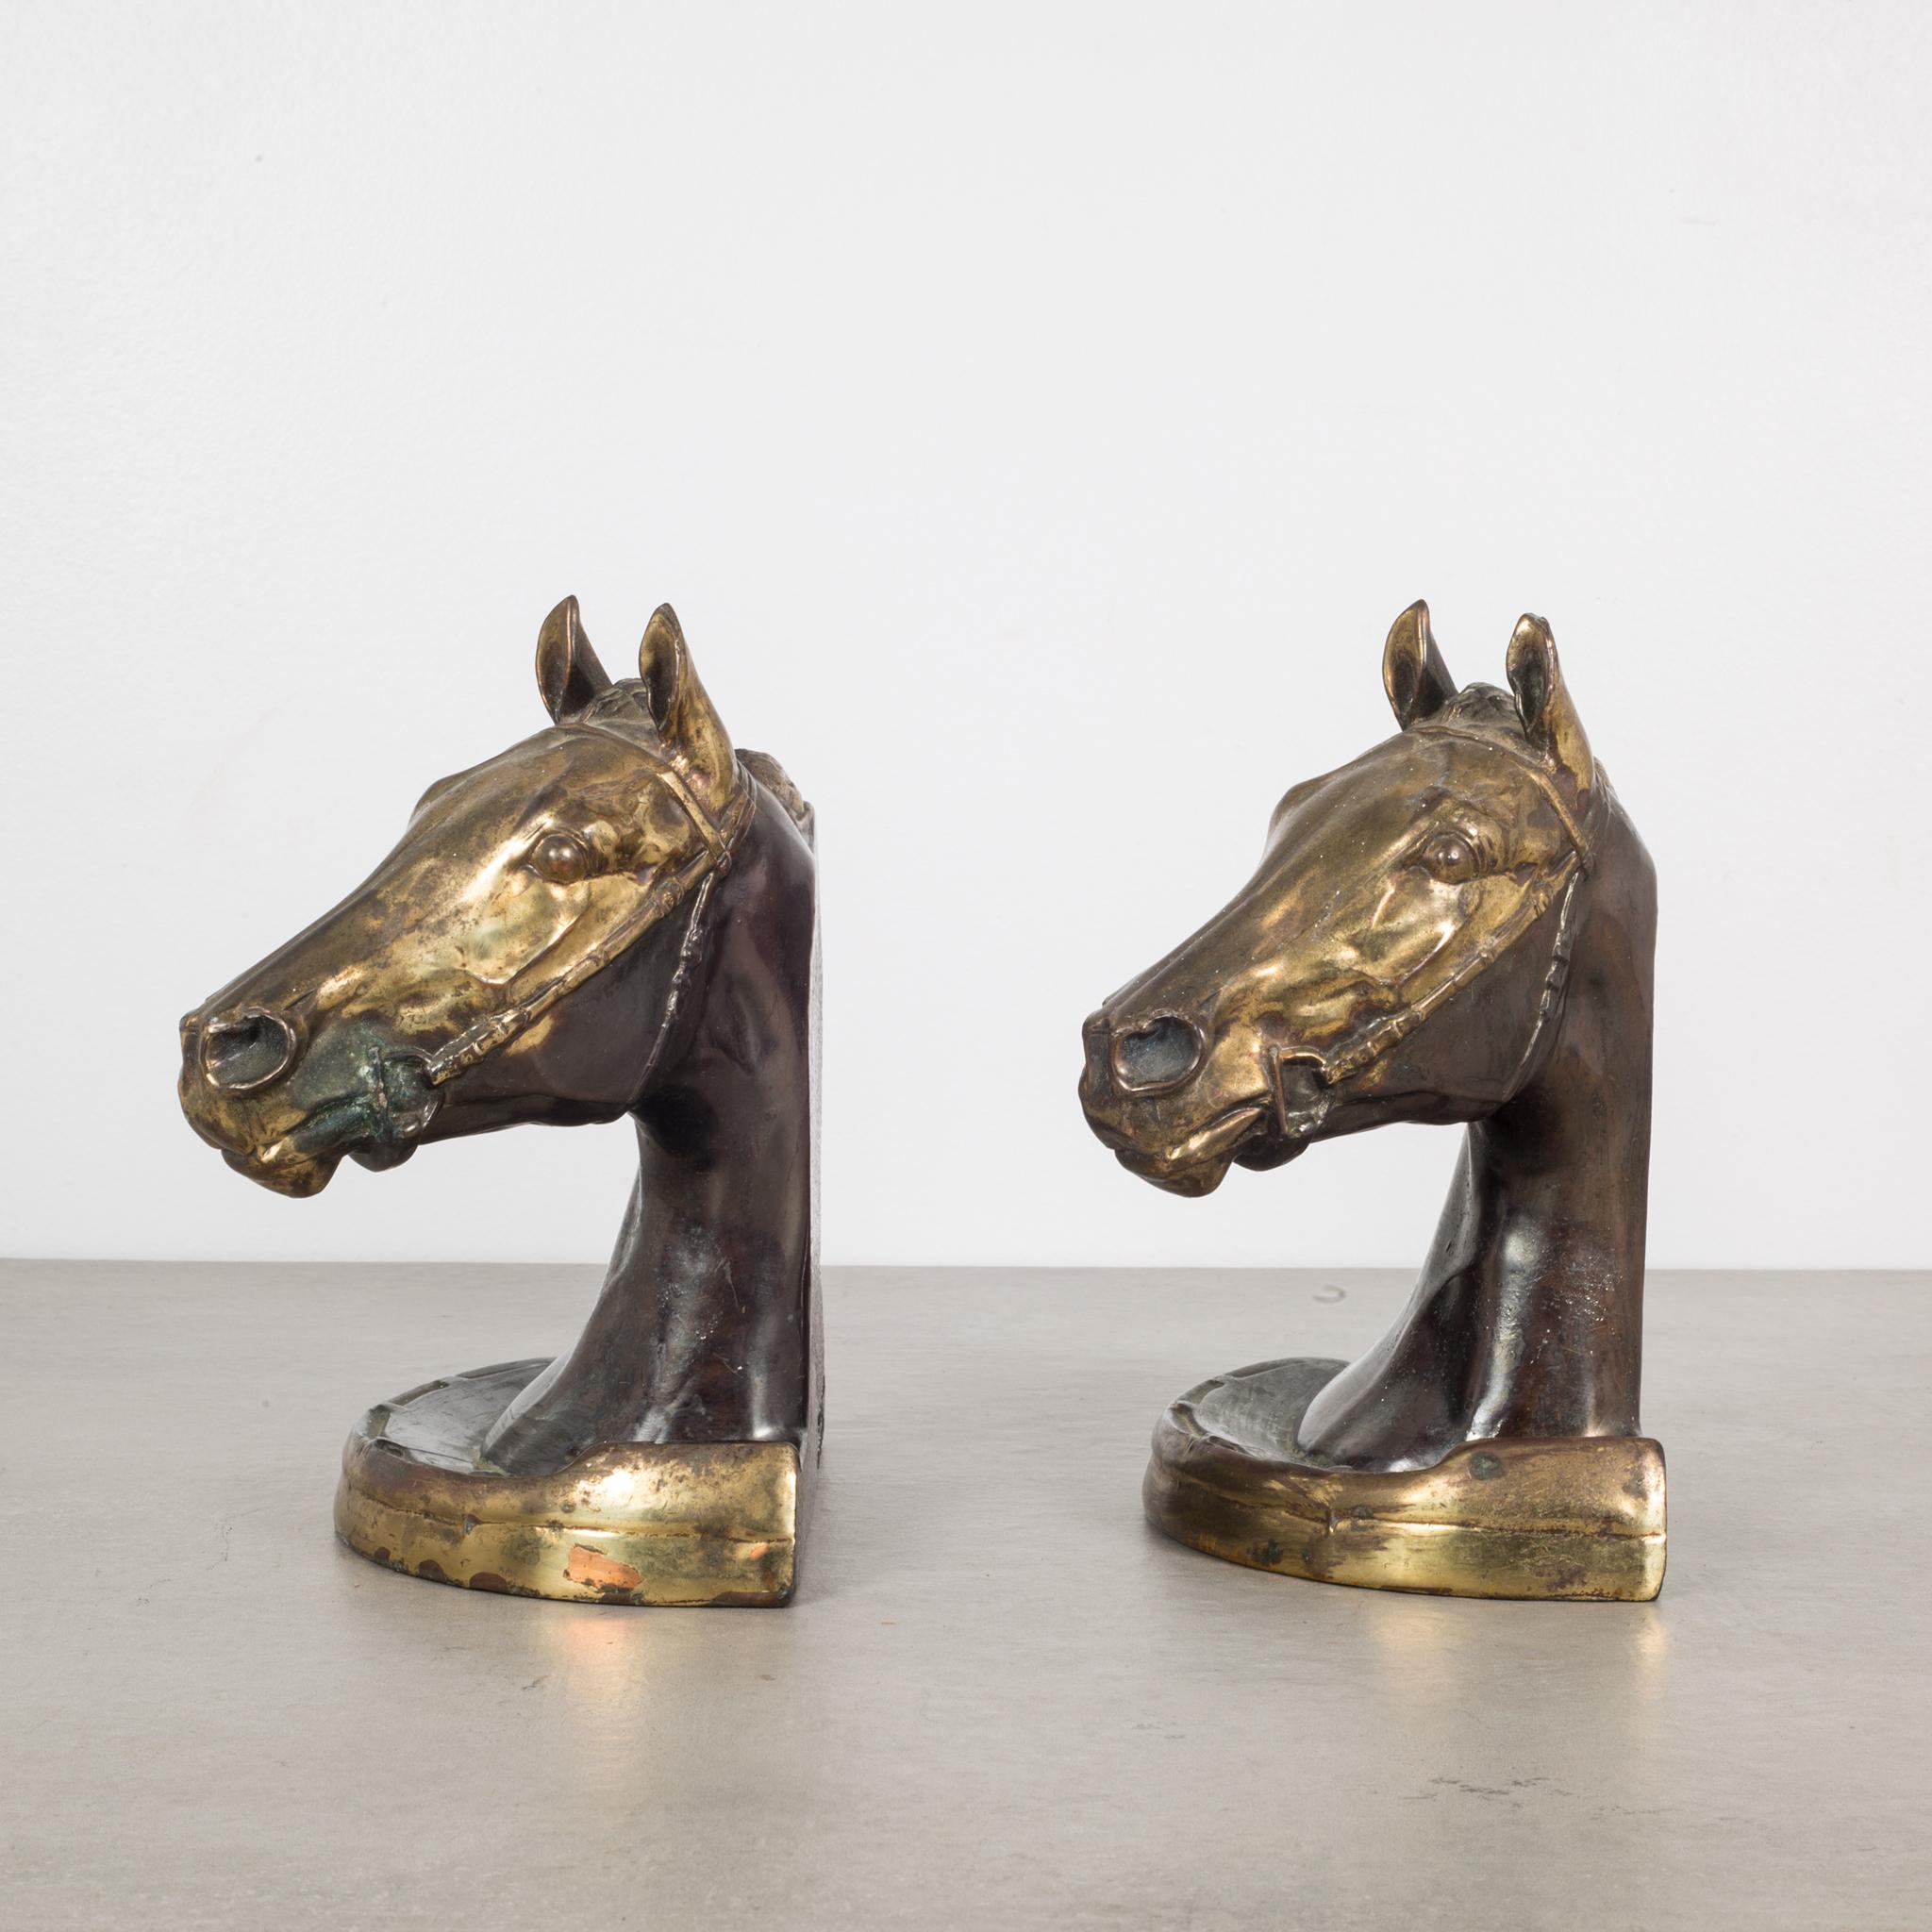 Art Deco Bronze-Plated Horse Head Bookends by Glady's Brown and Dodge, circa 1930